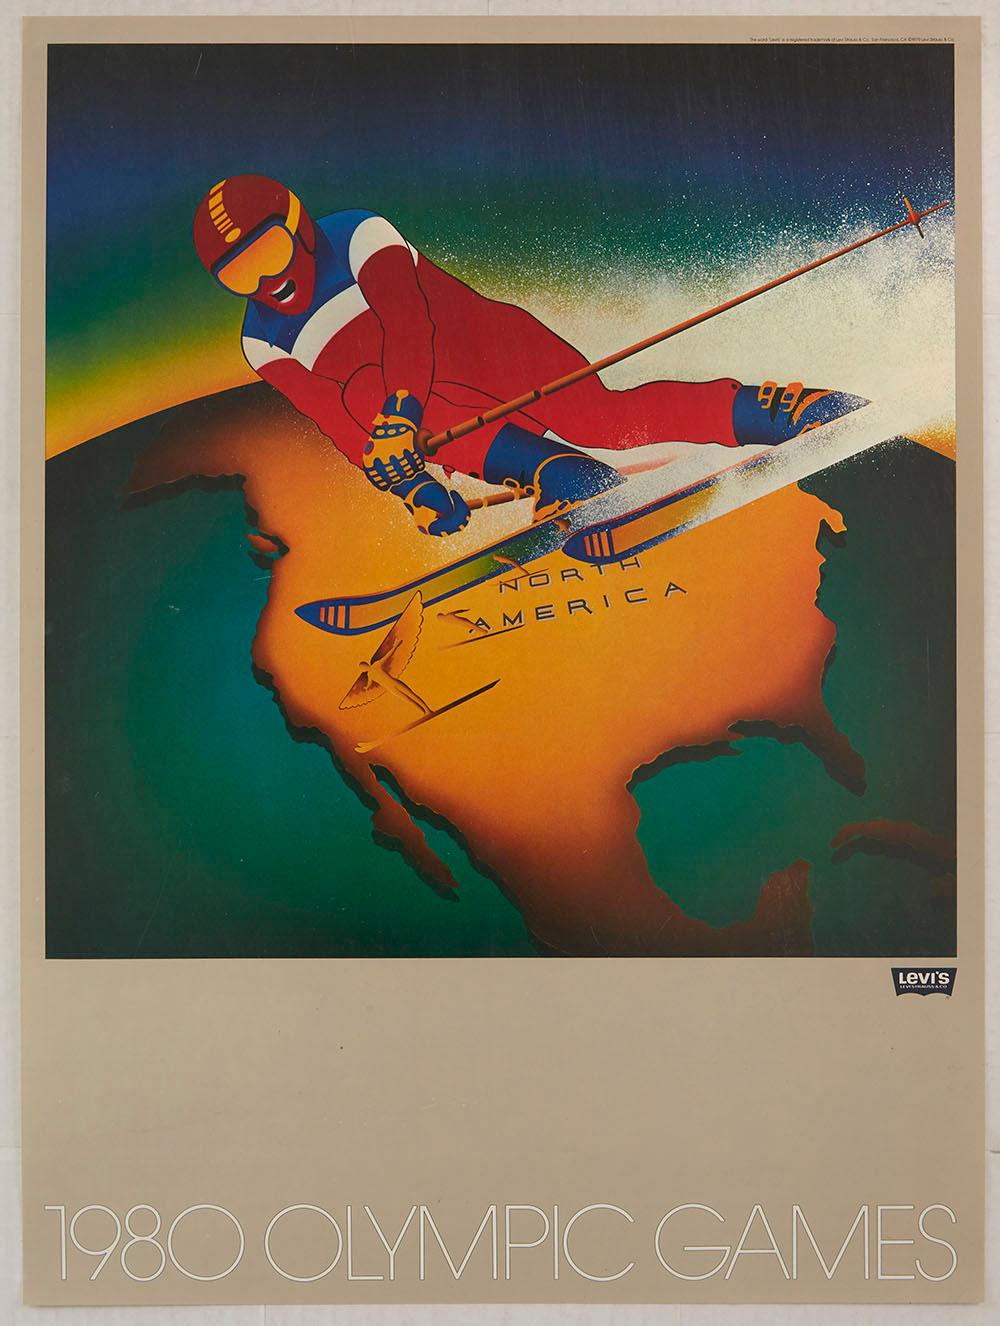 Set of 6 Original Vintage Posters 1980 Moscow Olympic Games Levi's Sport Design 2